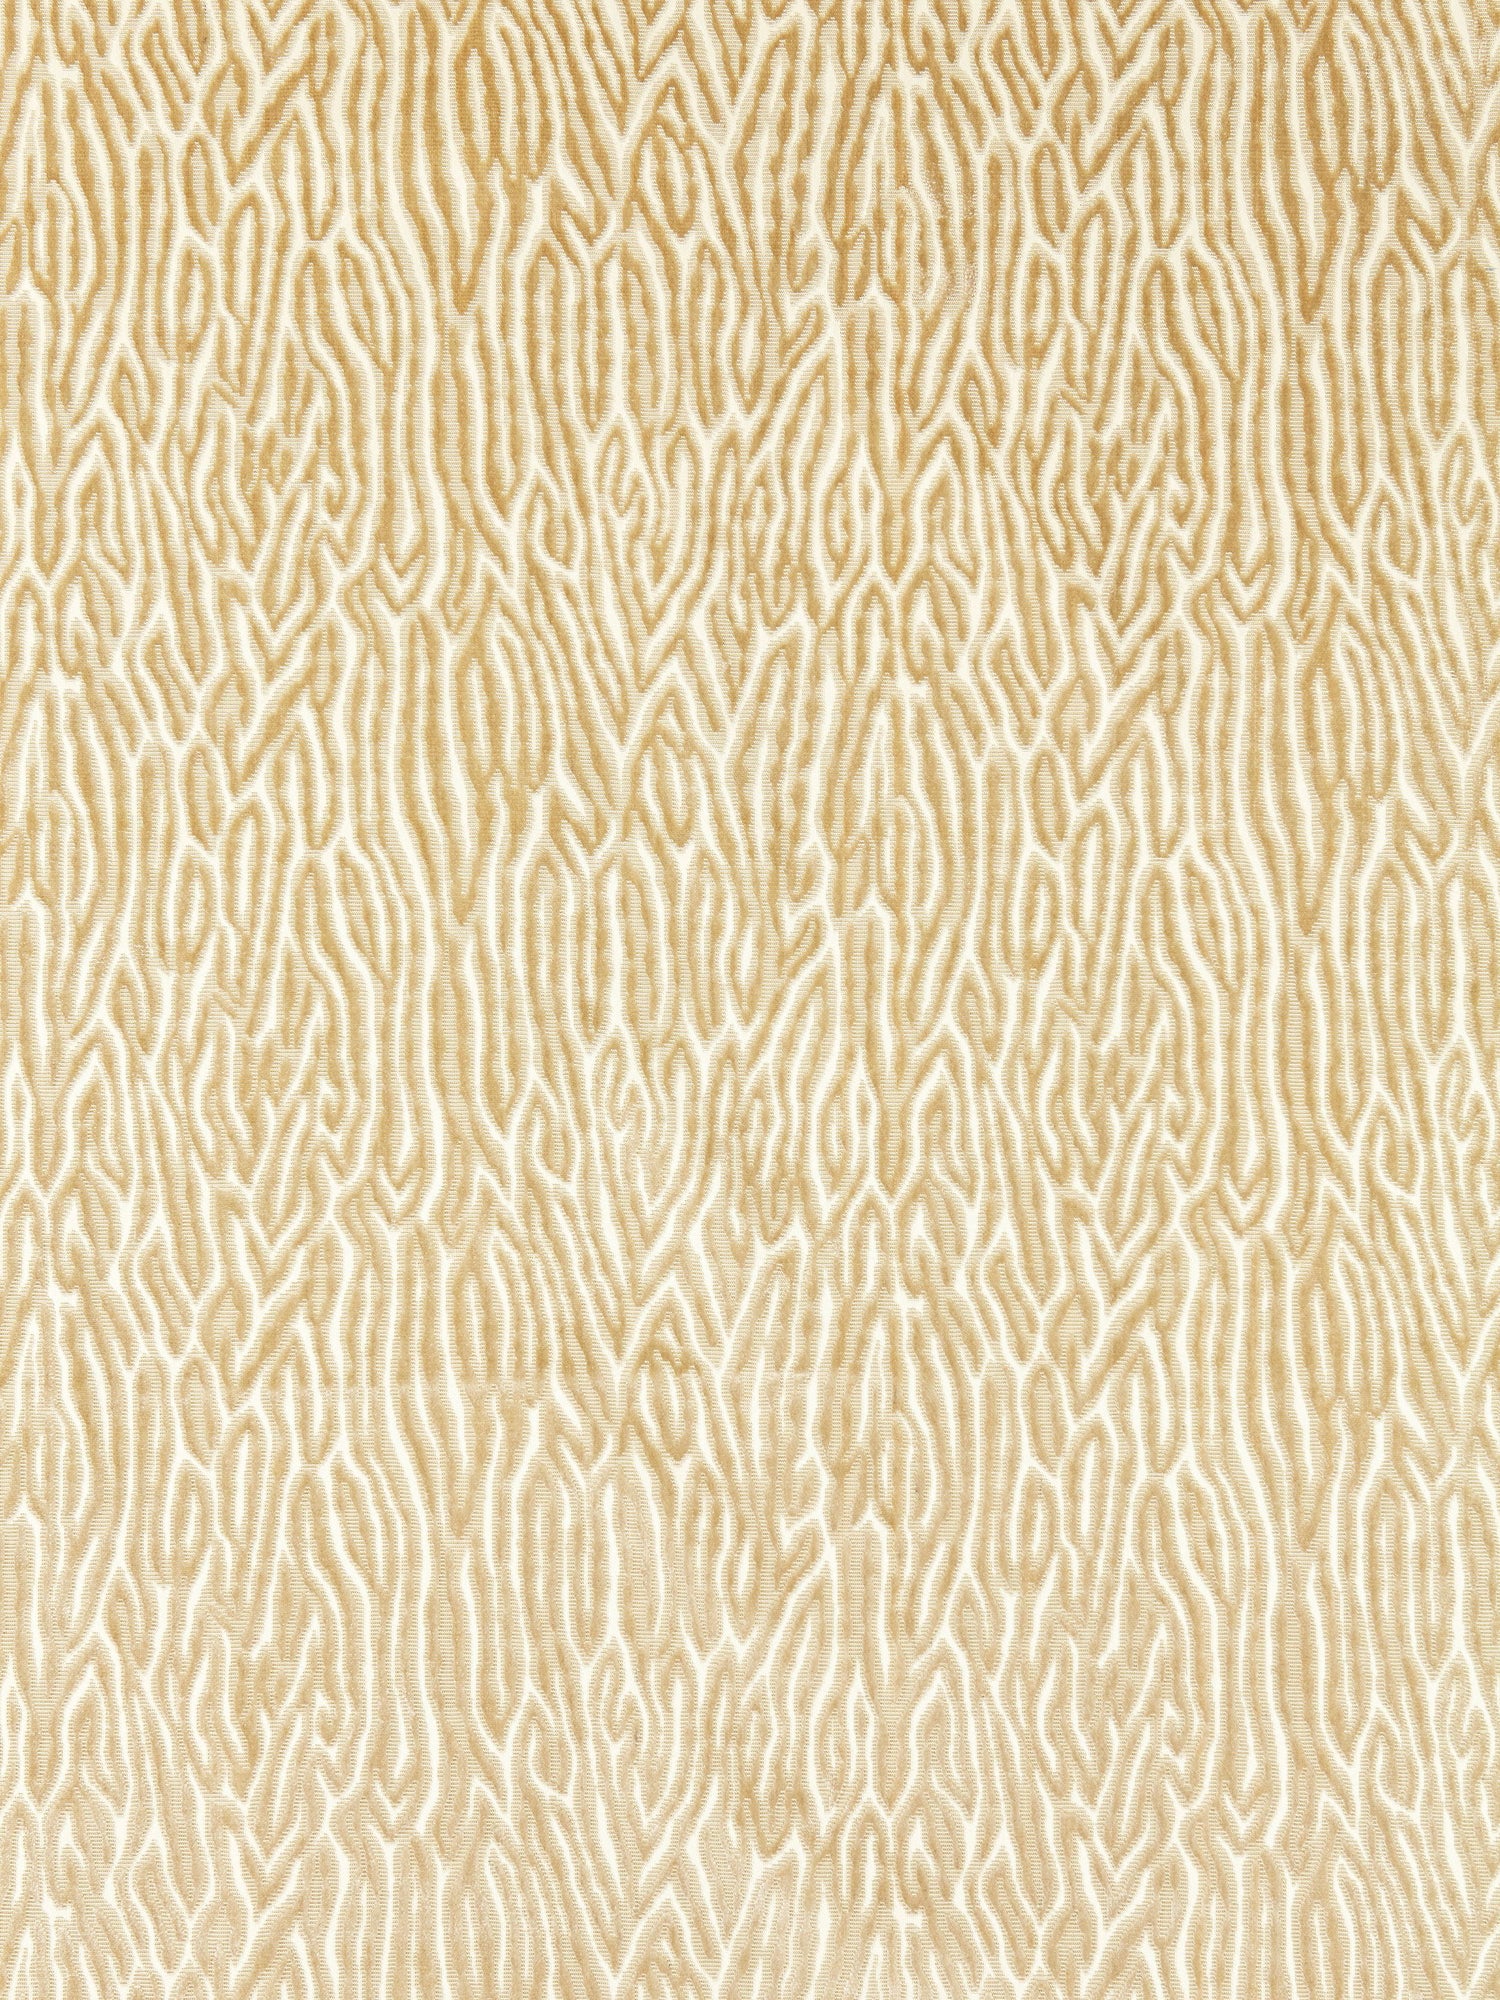 Faux Bois Velvet fabric in sand color - pattern number SC 000227076 - by Scalamandre in the Scalamandre Fabrics Book 1 collection